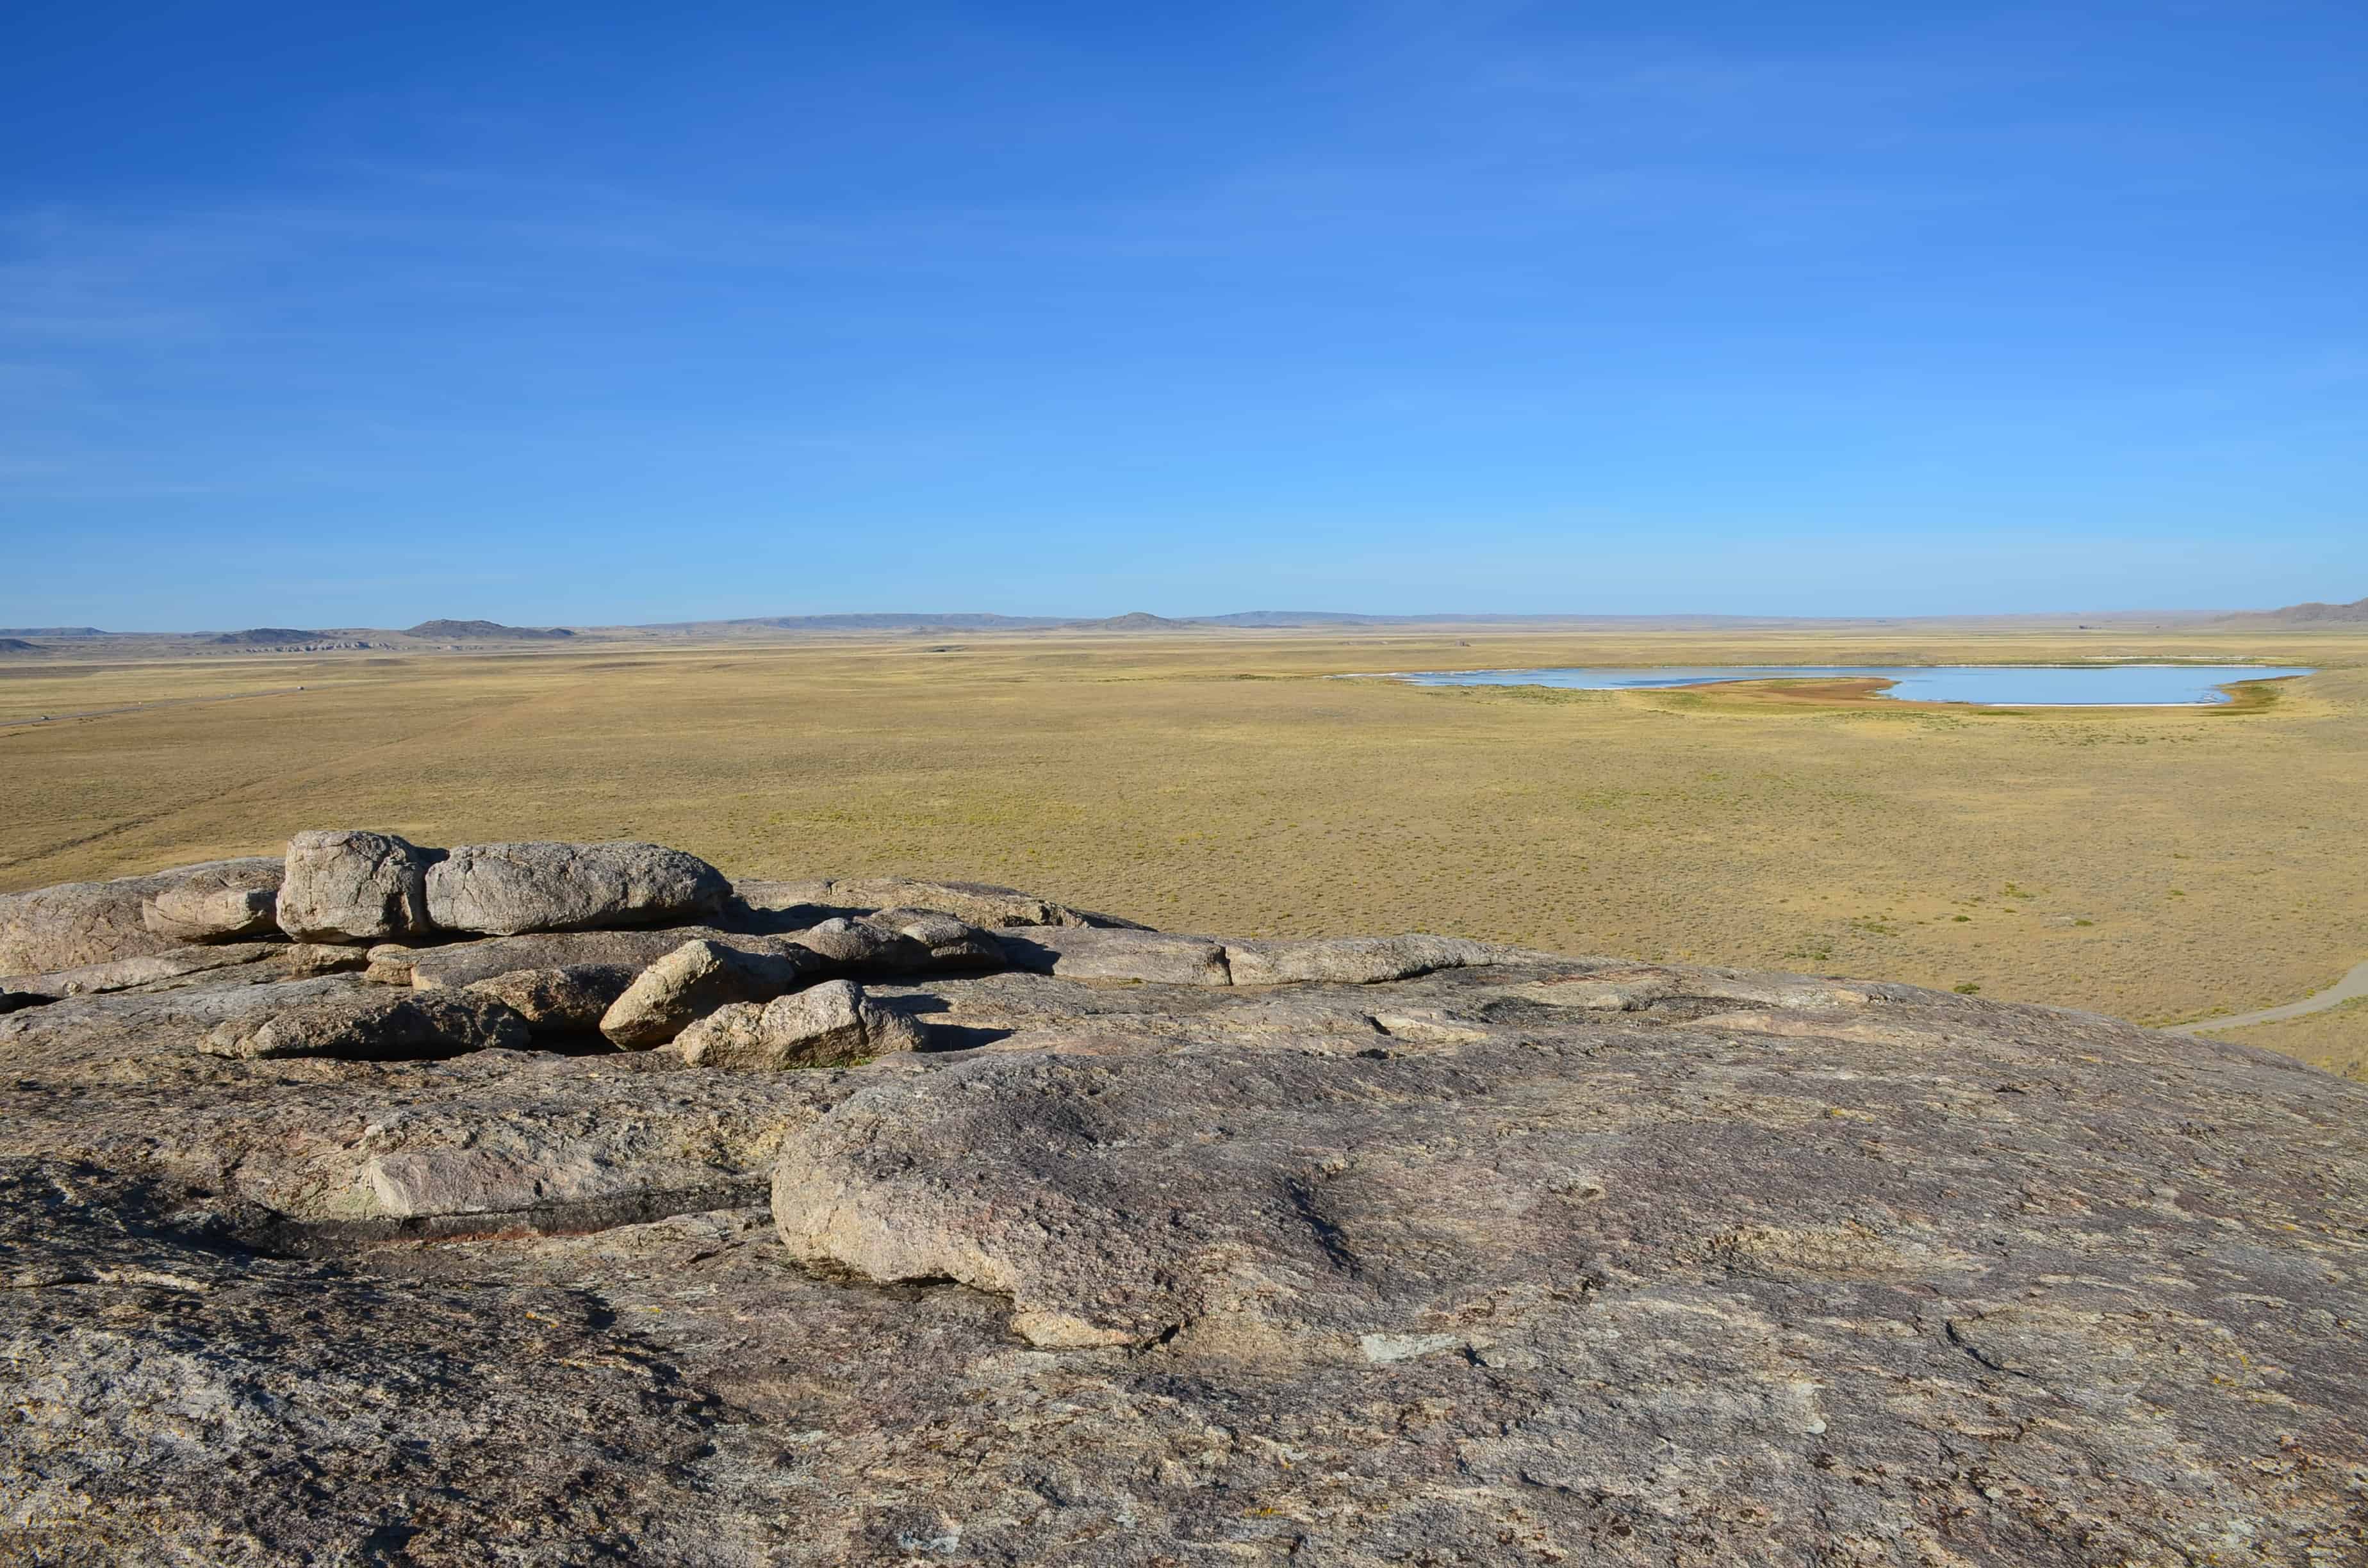 The view from the top of Independence Rock State Historic Site in Wyoming